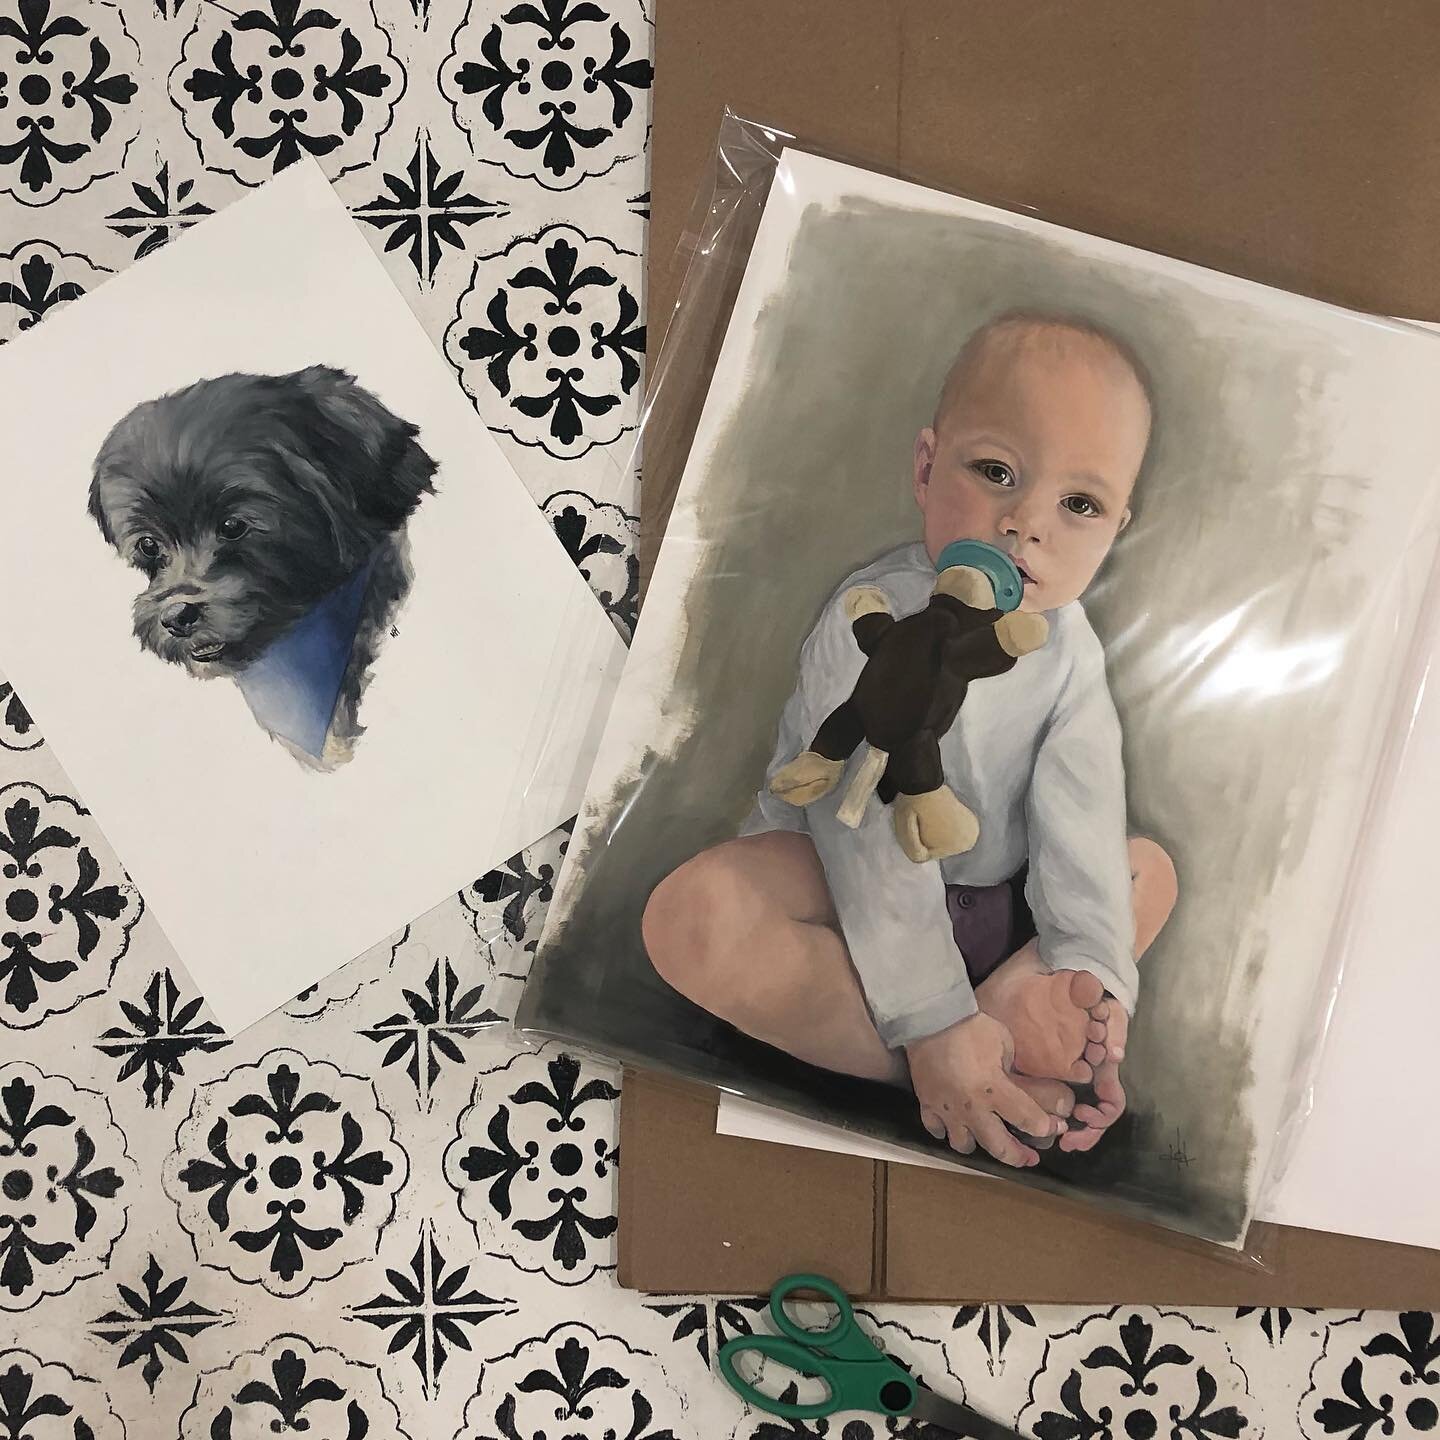 Packing up paintings! Can&rsquo;t wait for these to get to their new homes.

#oiloncanvas #babyportrait #oilonpanel #dogportrait #oilpainting #yegart #art #painting #yeg #portrait #artistsoninstagram #artistsofinstagram #yeg #yegart #yegartist #portr